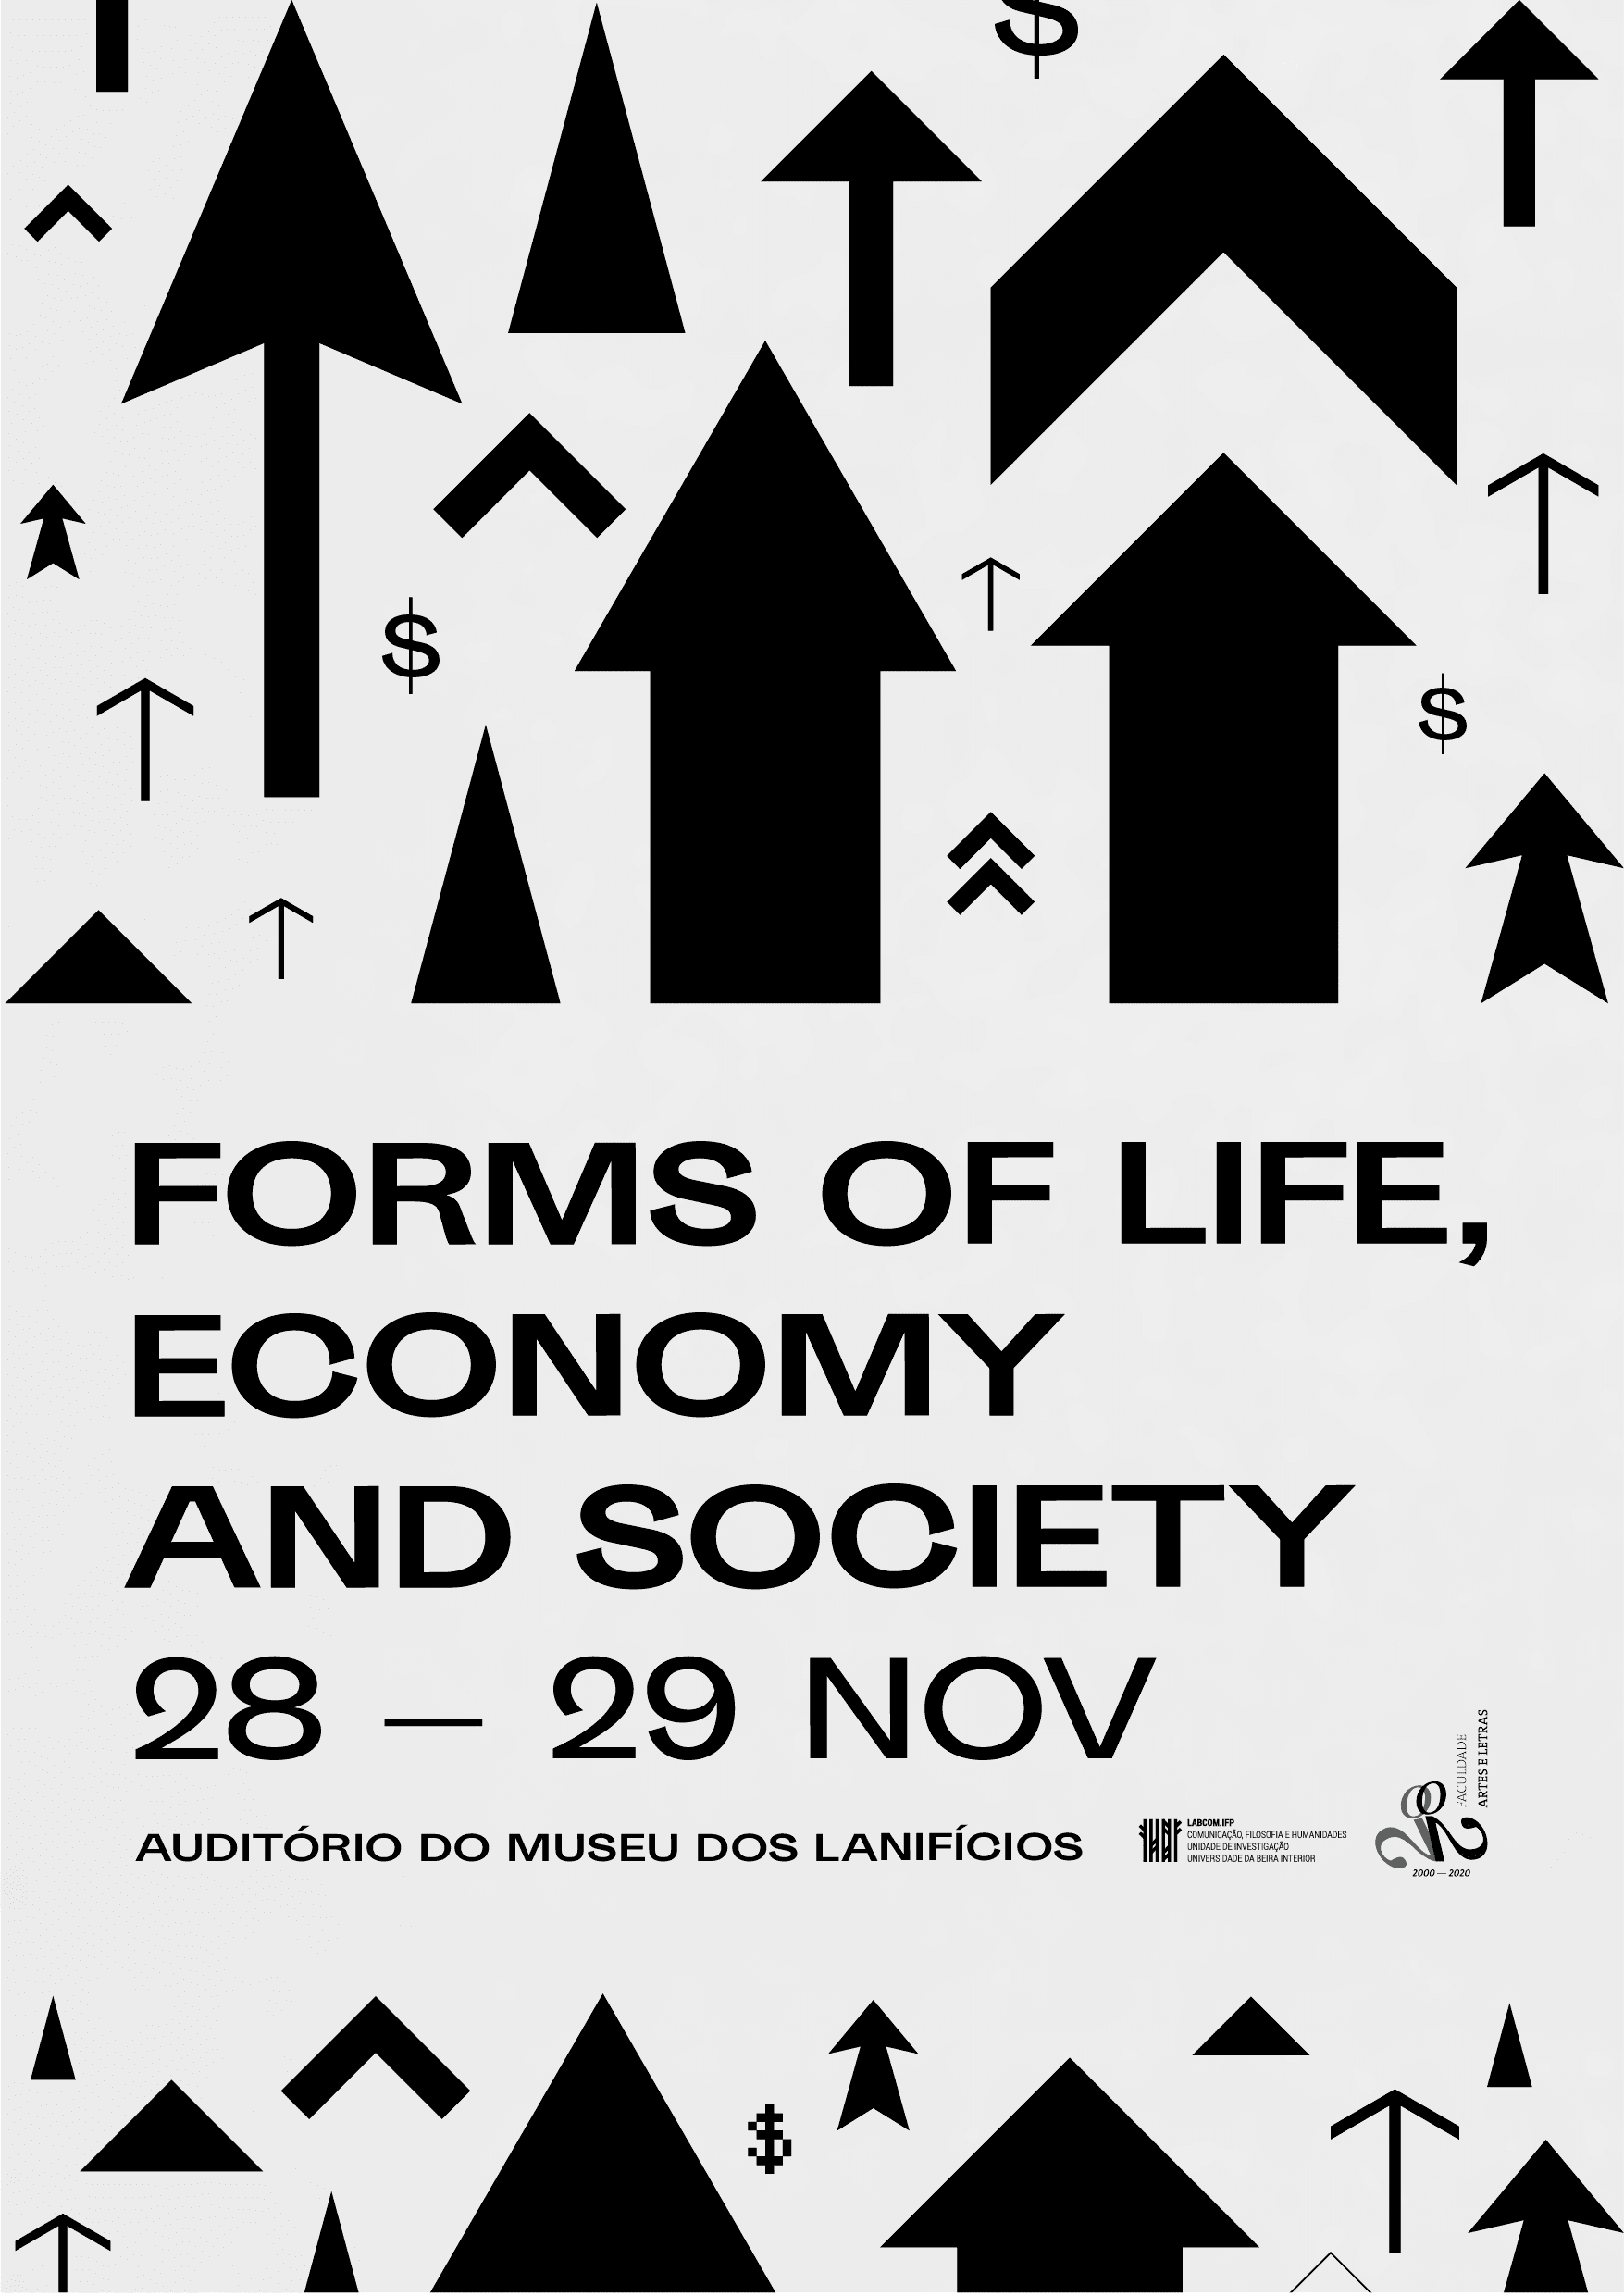 Cartaz - Forms of Life, Economy and Society